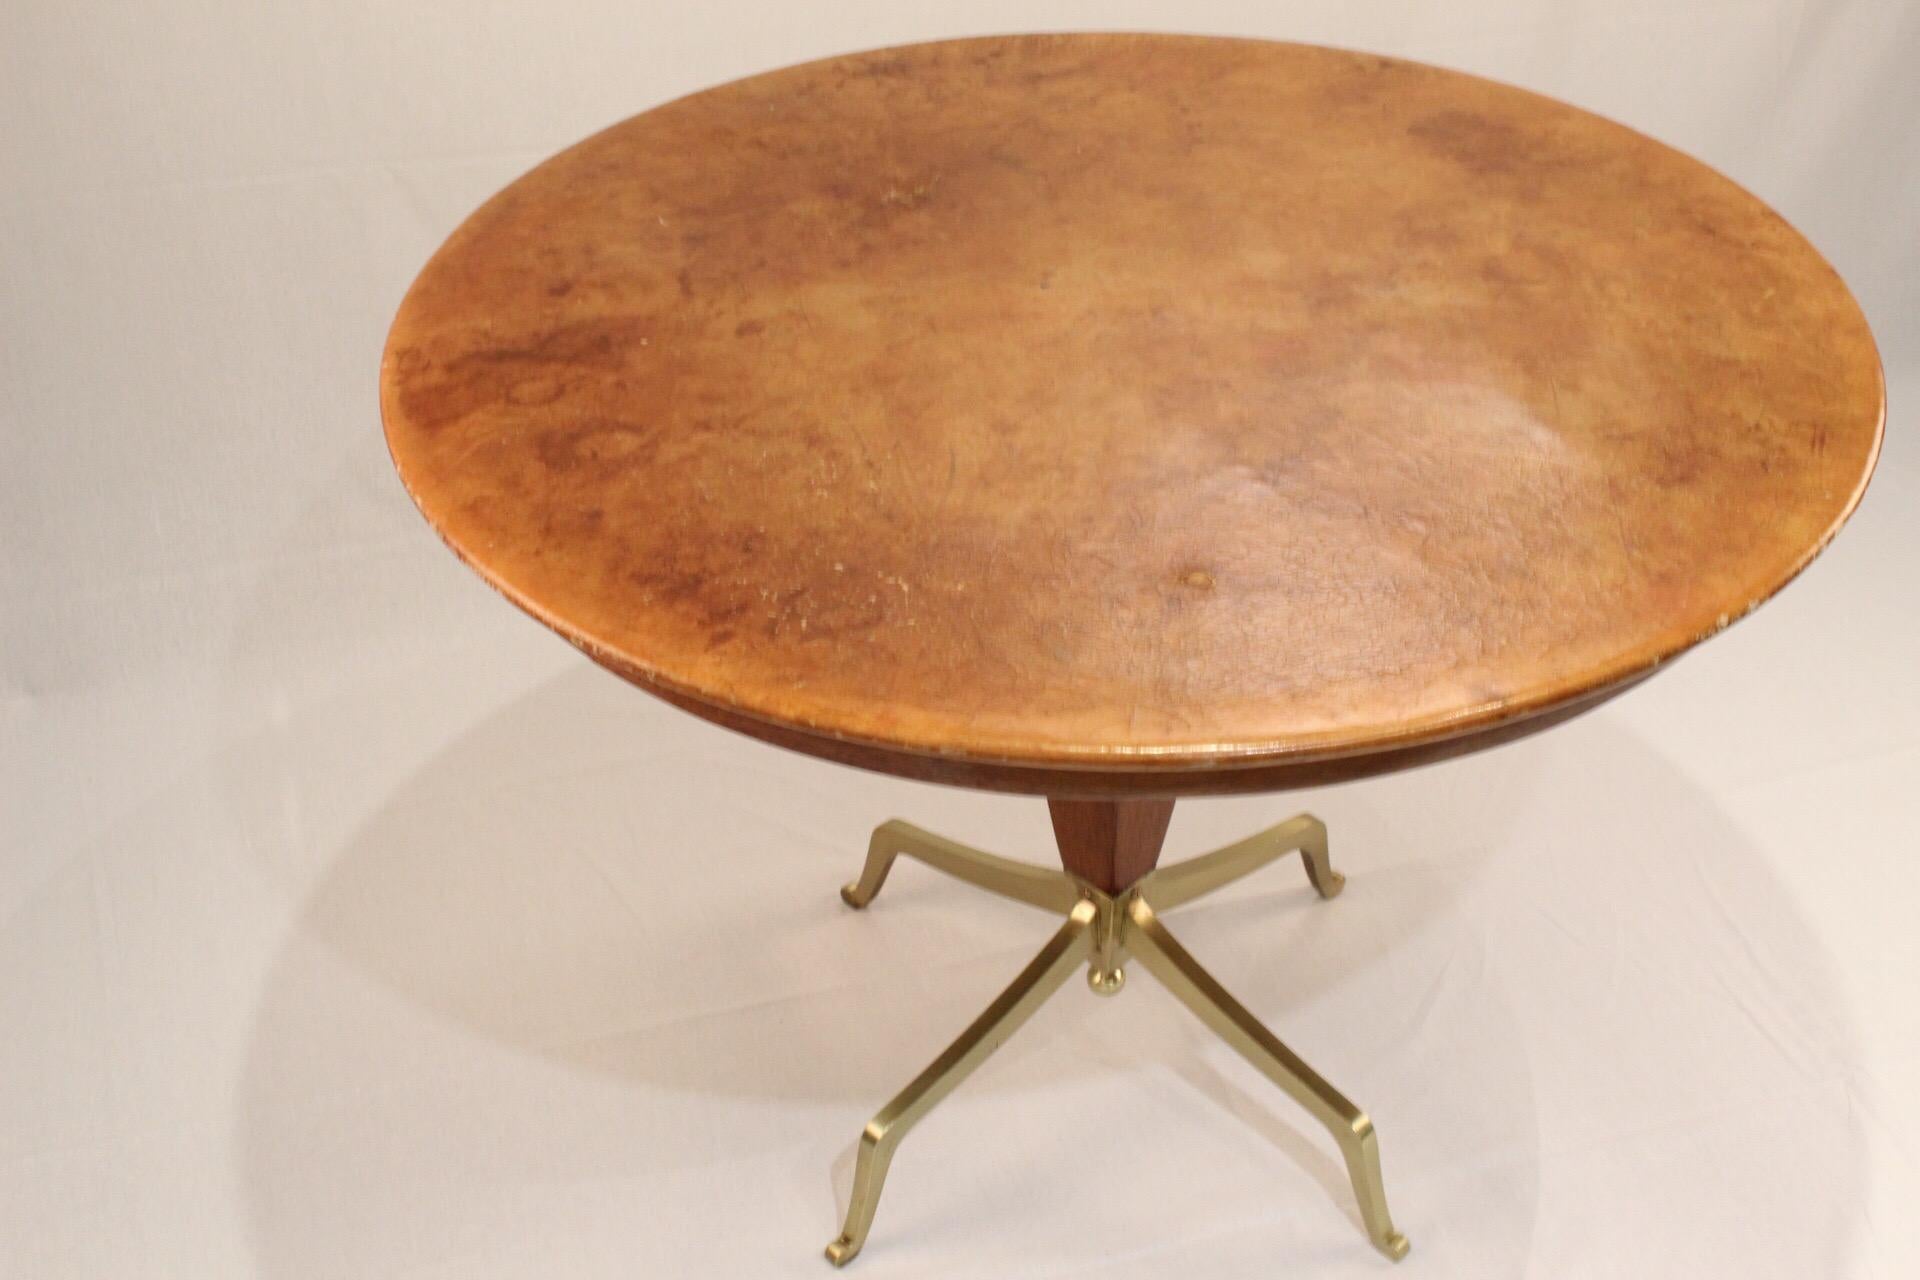 Round leather, mahogany and brass game table. Professionally restored, made in Mexico in the late 1950s, beautiful brass legs.